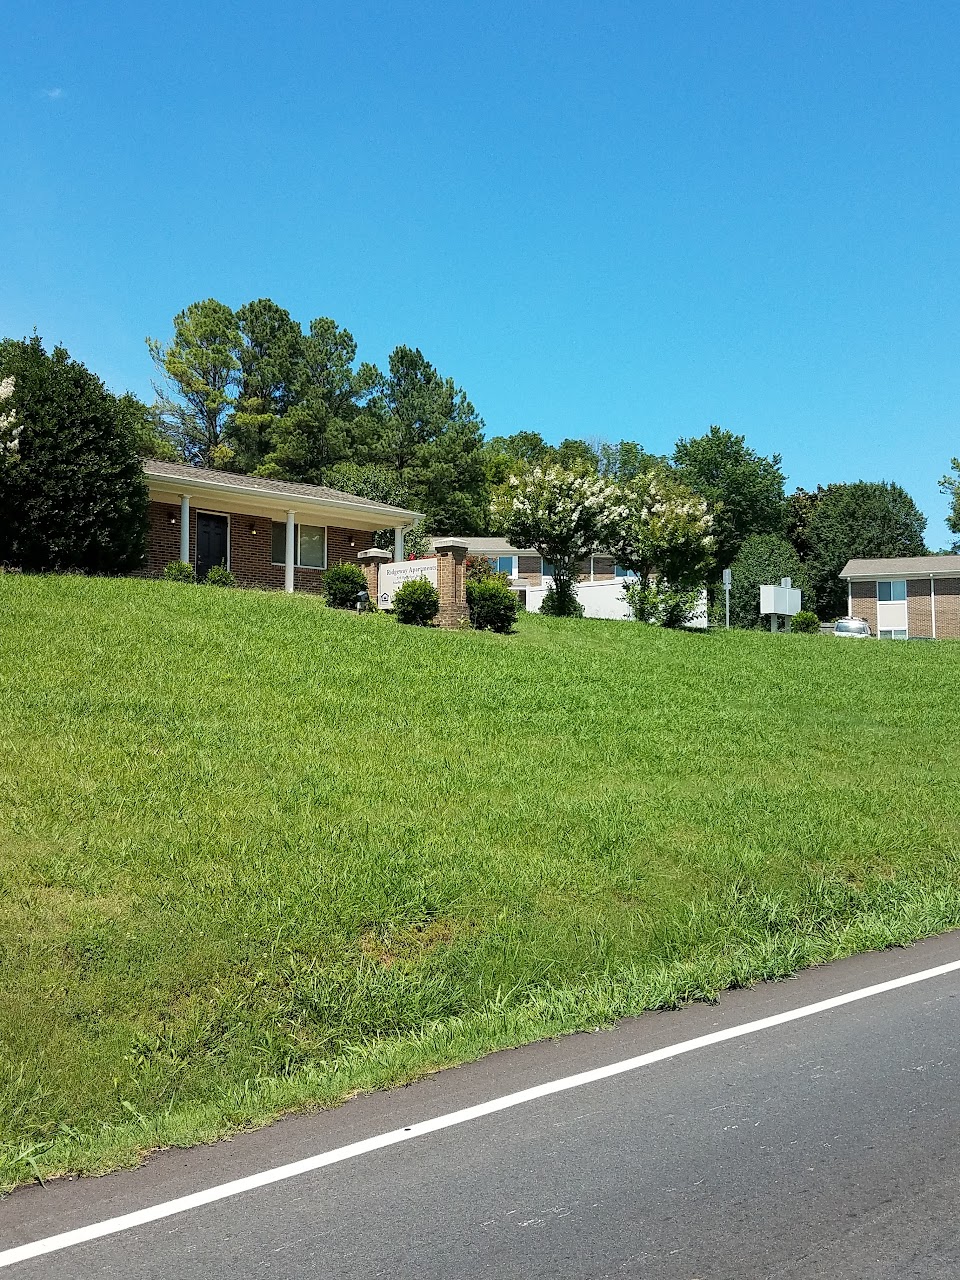 Photo of RIDGEWAY APTS. Affordable housing located at 225 BALLPLAY RD MADISONVILLE, TN 37354